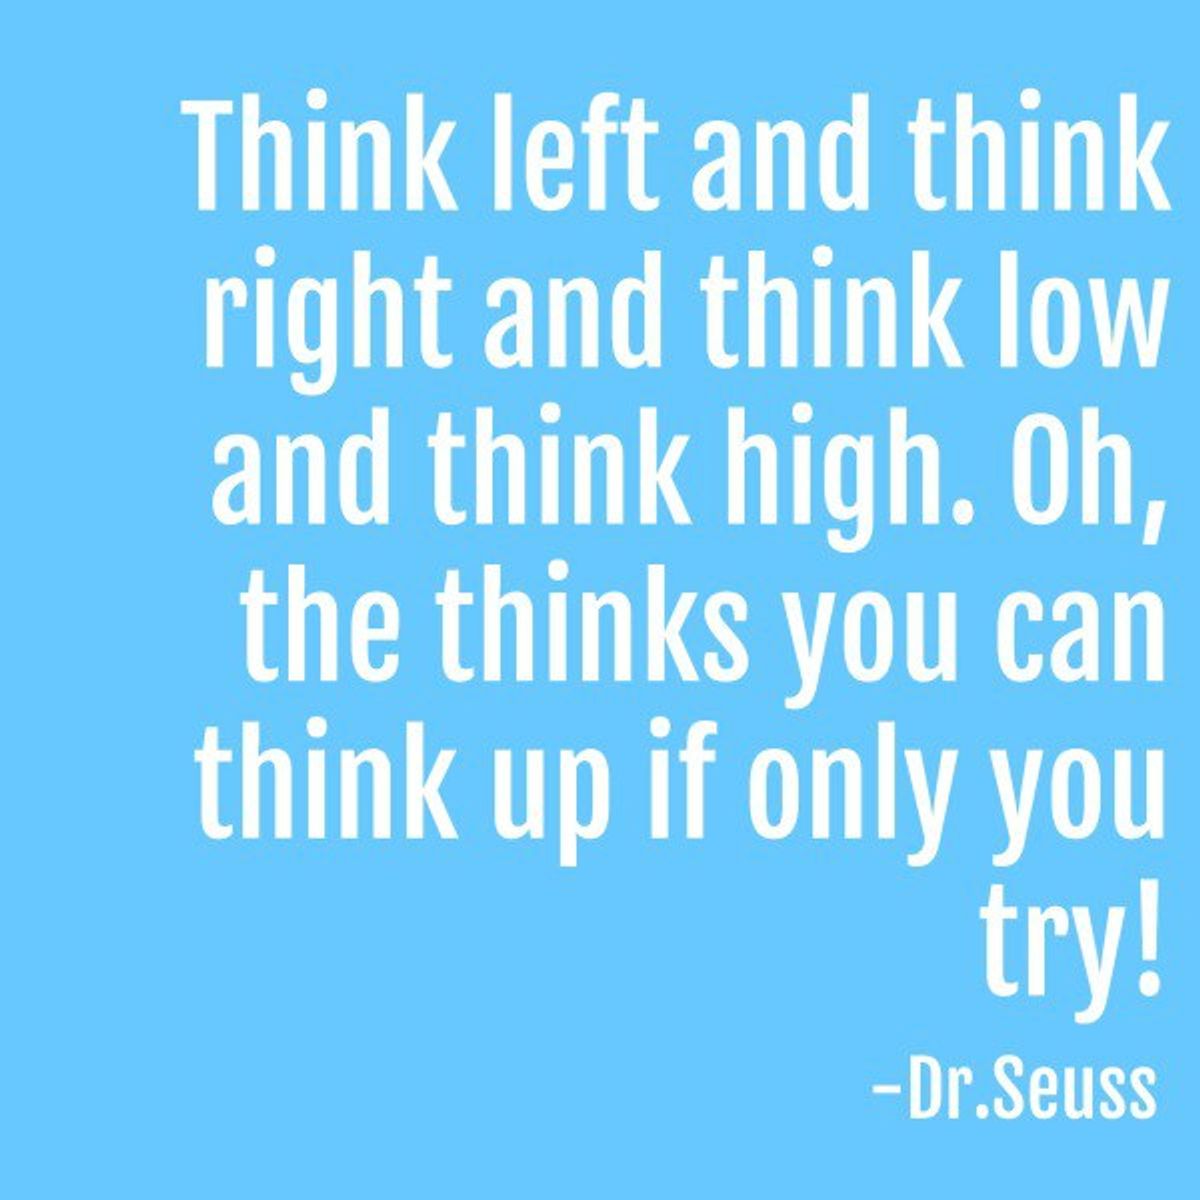 25 valuable thoughts on life Doctor Seuss left us.